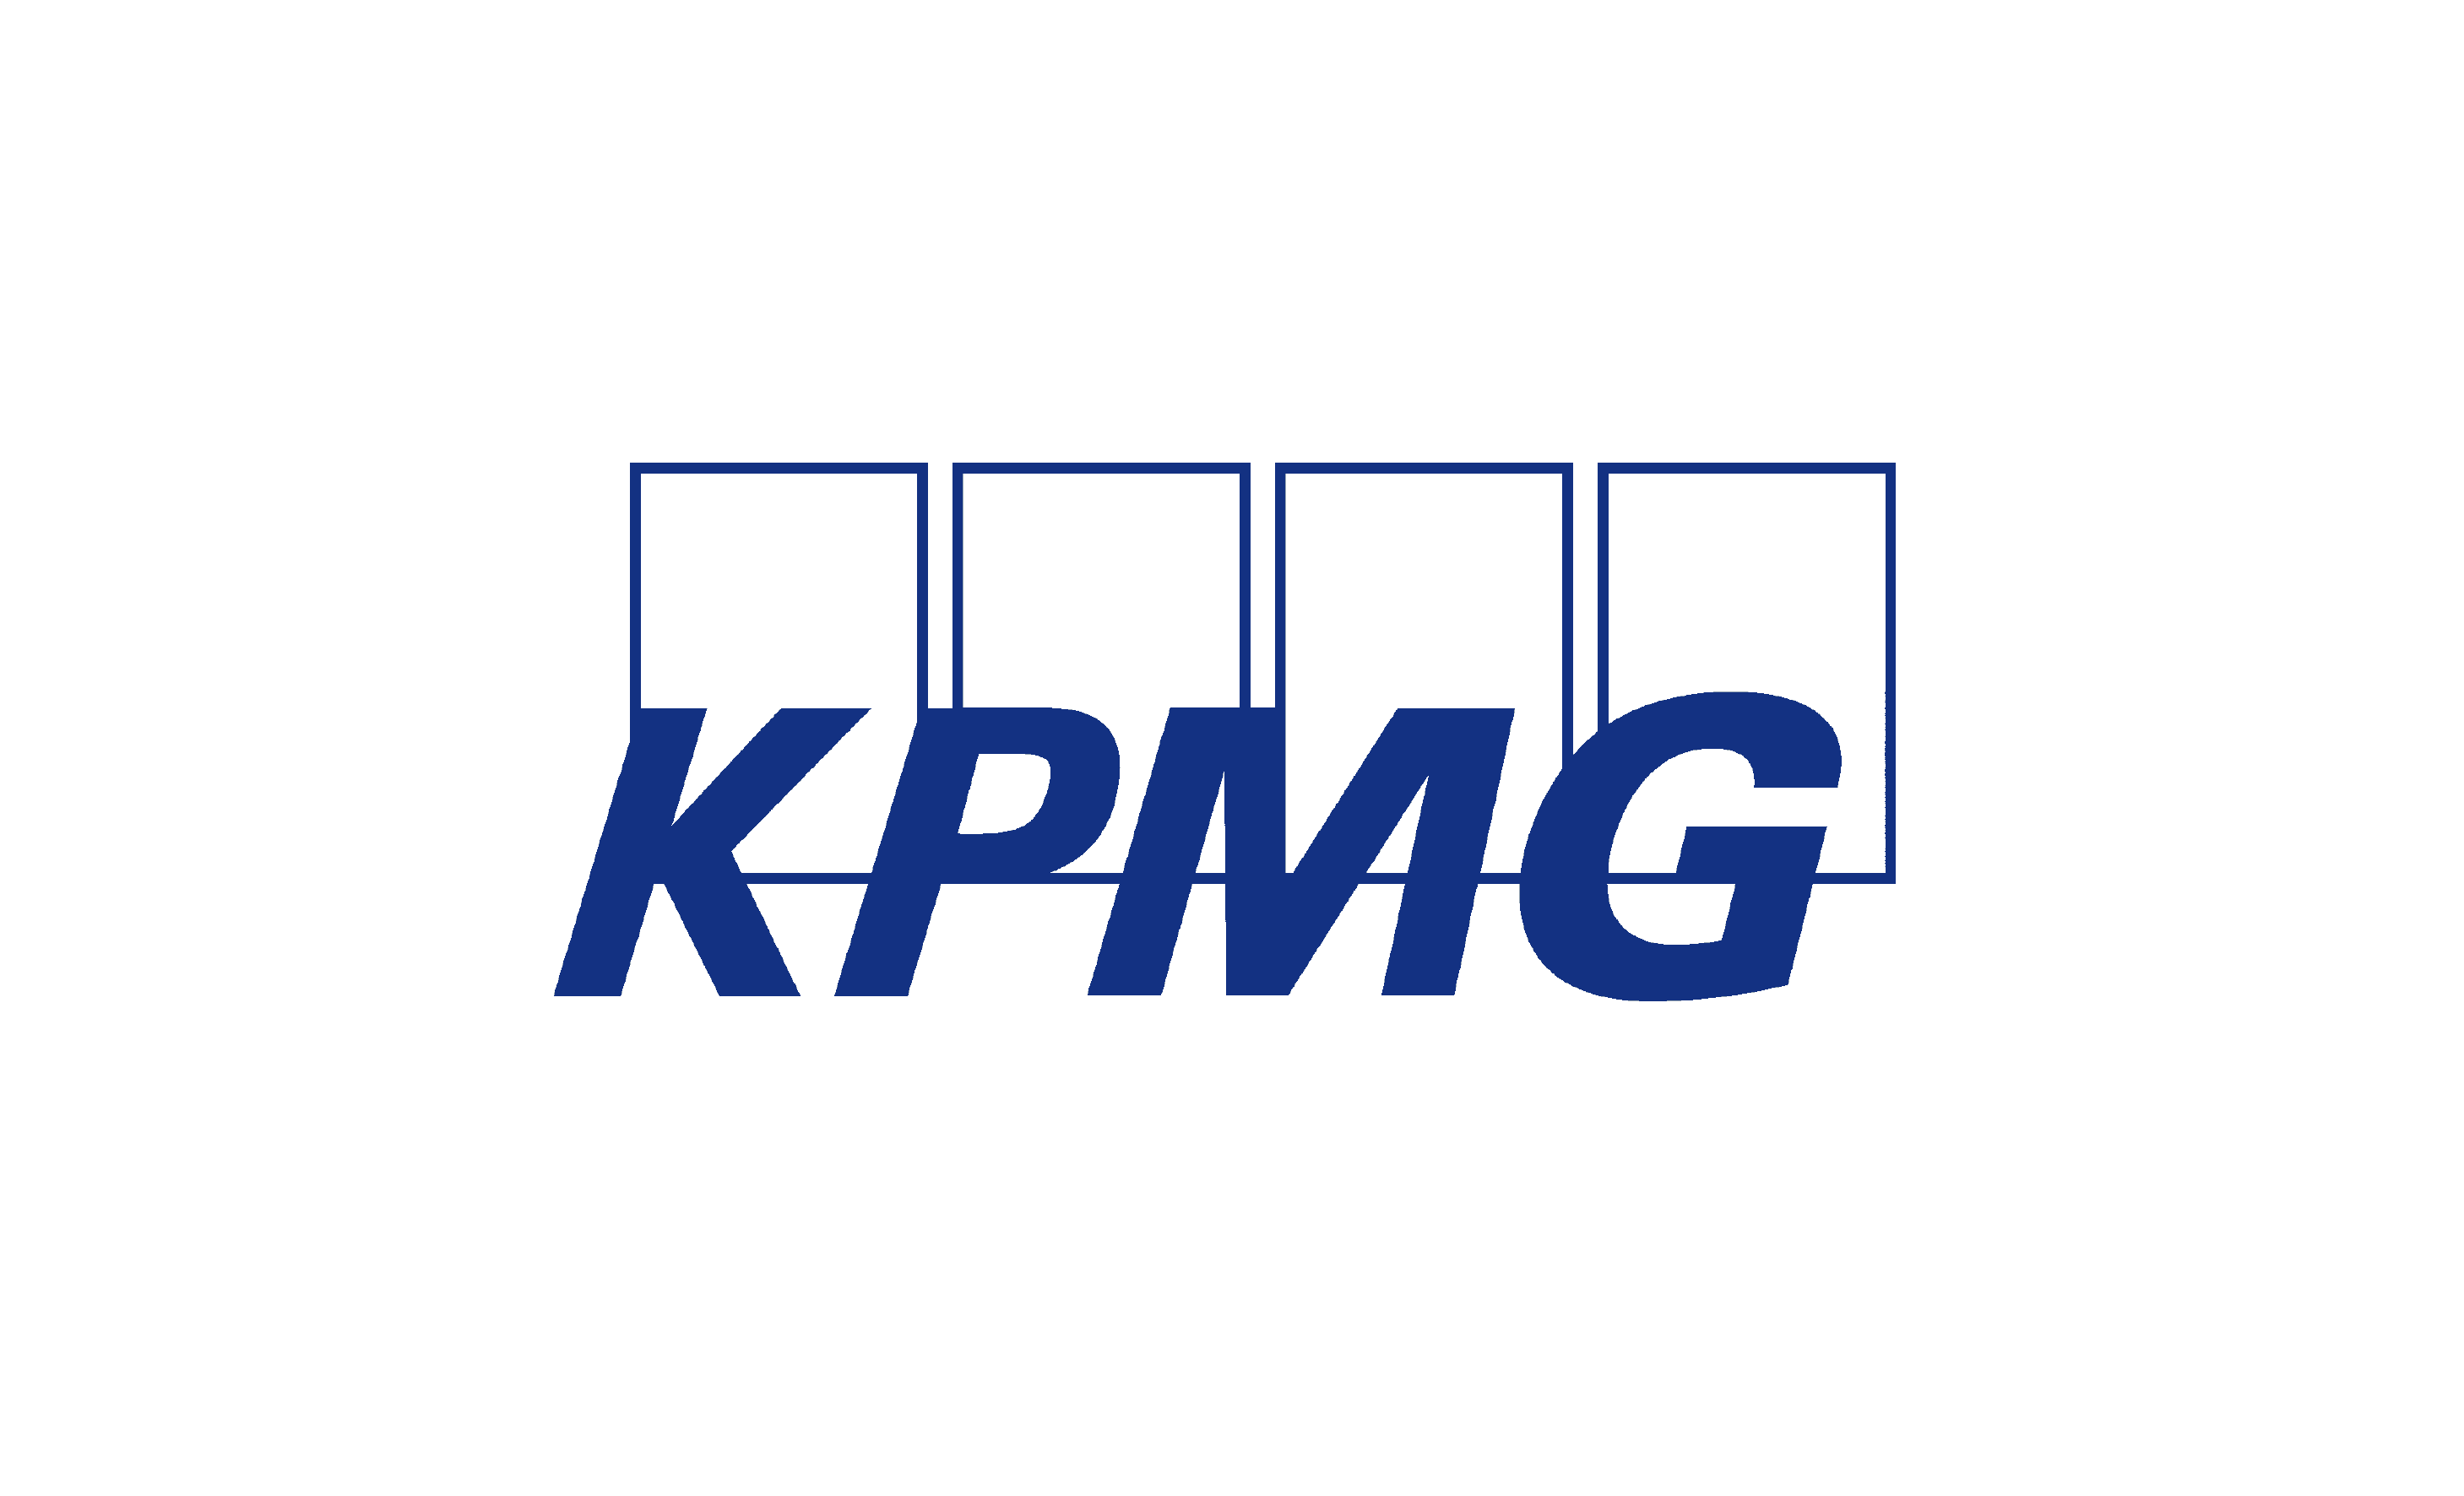 KPMG-The Art of Turning Bold Ideas Into Game-Changing Realities